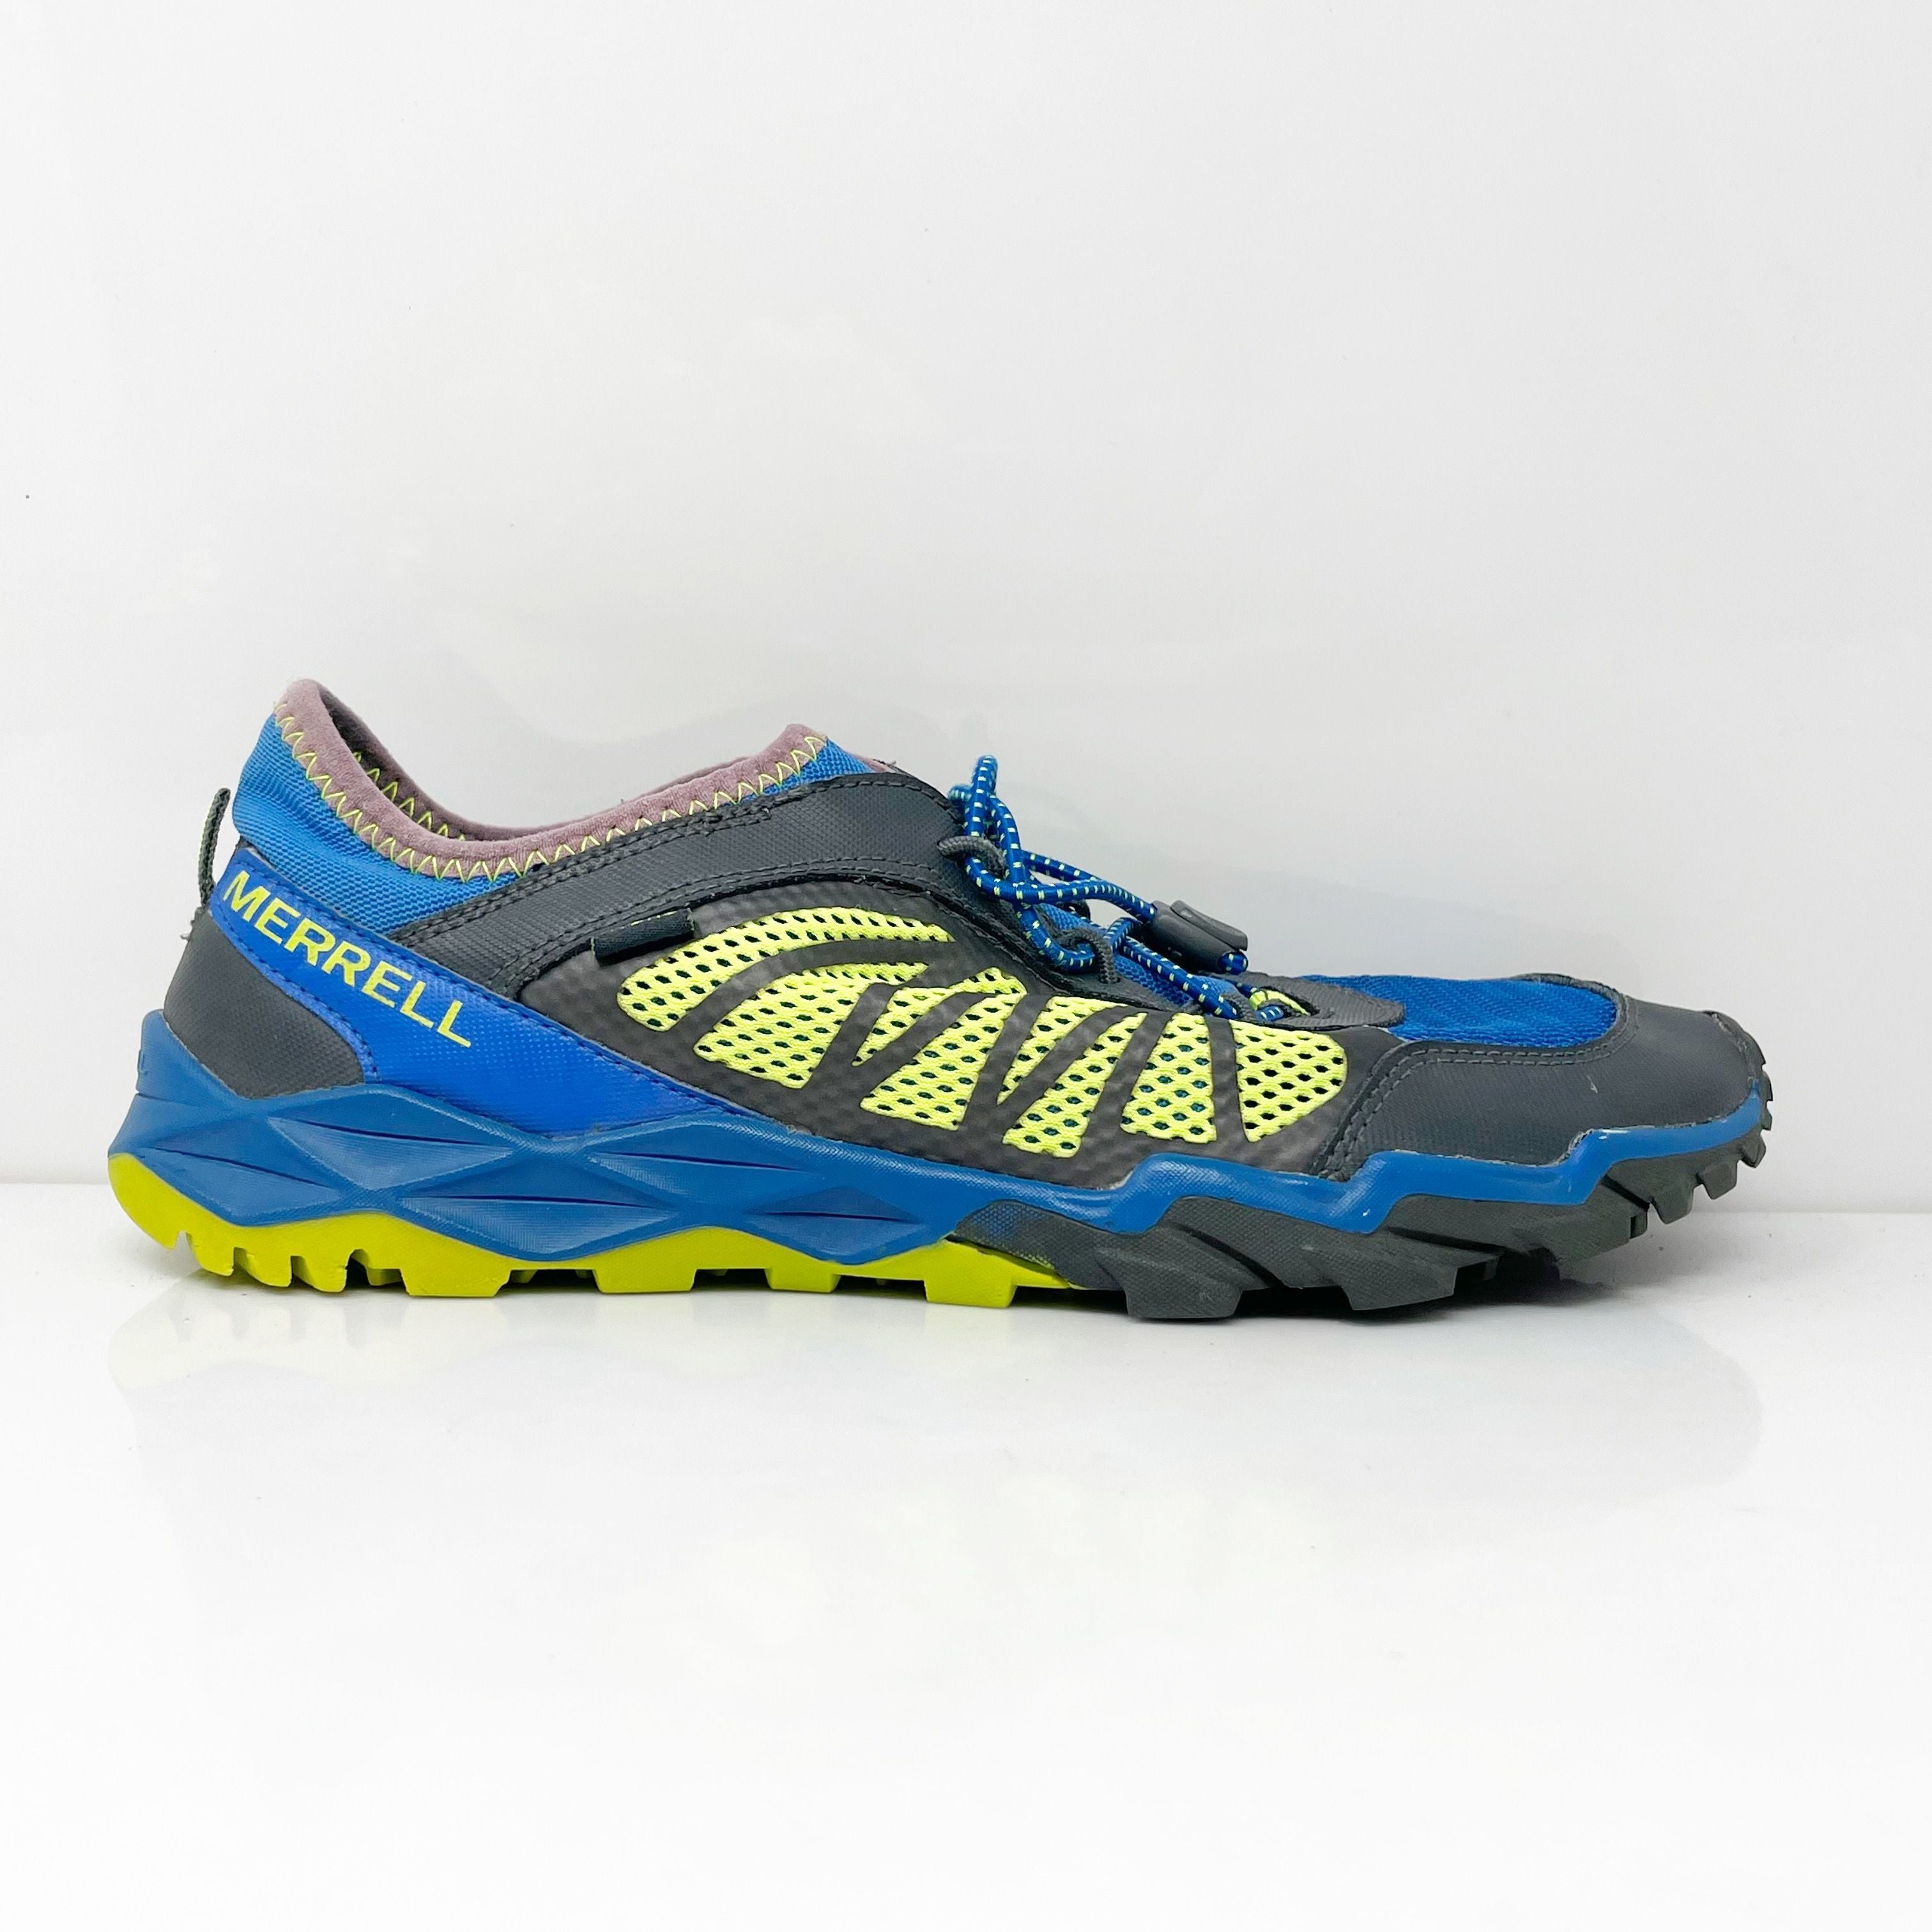 Merrell Boys Hydro Run 2.0 MY56506 Blue Hiking Shoes Sneakers Size 5.5 ...